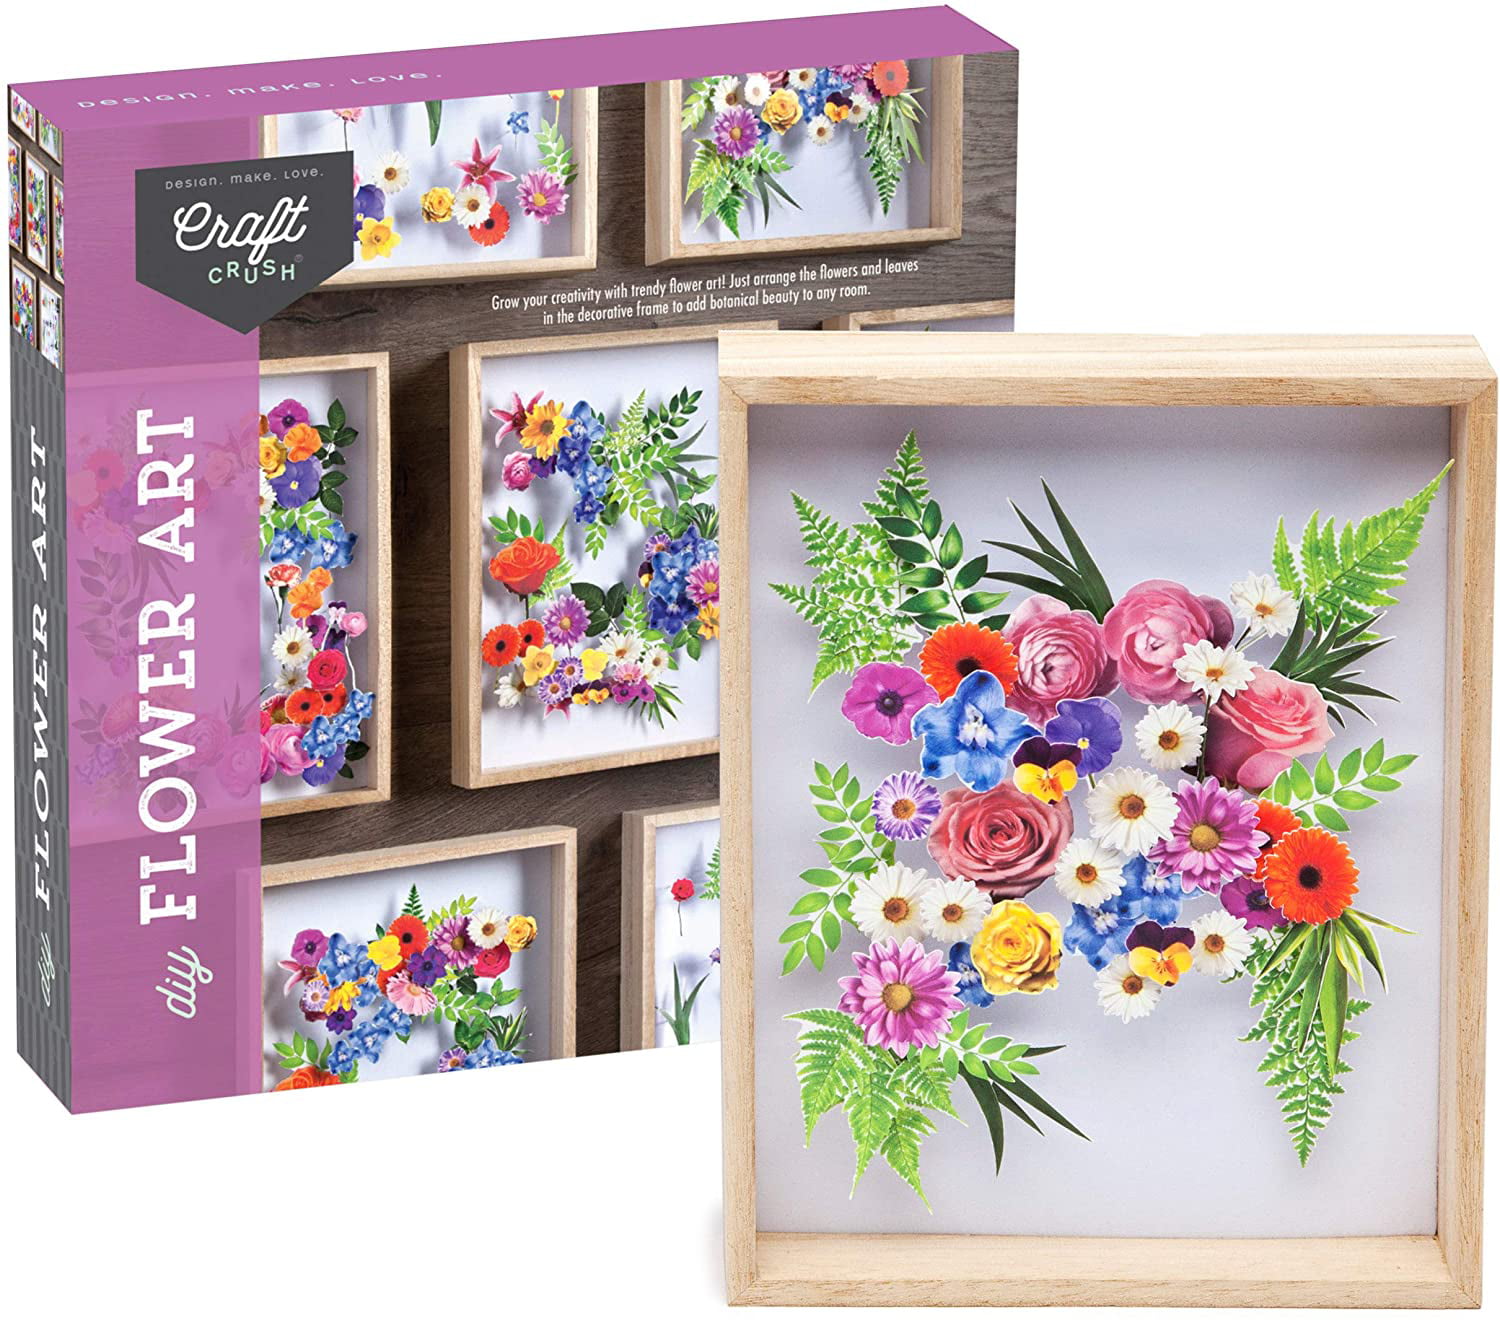 Arrange Pre-Cut Paper Flowers and Foliage to Create a One-of-a-Kind Framed Arrangement Craft Crush DIY Flower Art Craft Kit